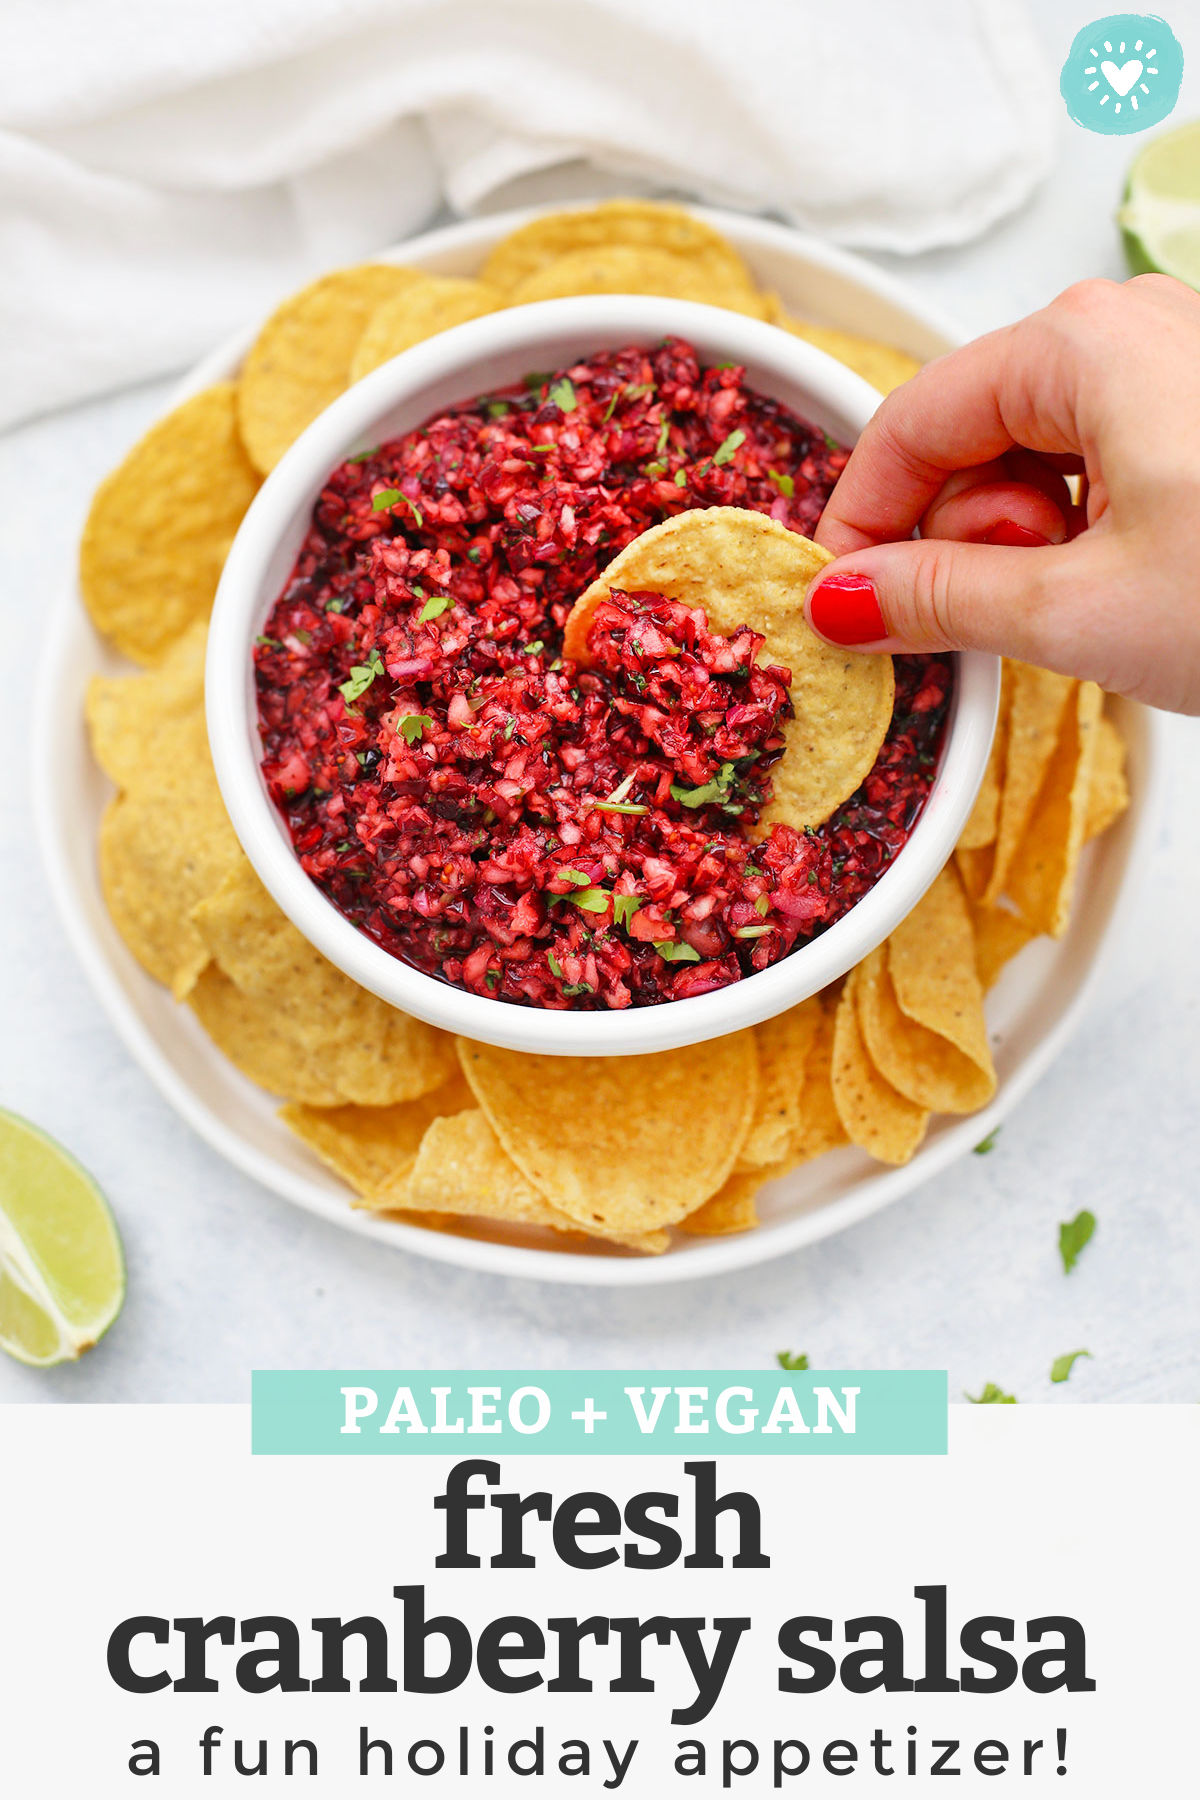 Fresh Cranberry Salsa (+a fun appetizer idea!) - Cranberry salsa is the perfect holiday appetizer! It's always a hit at parties. Check out all the fun ways to serve it in the post! (Paleo or Vegan) Cranberry Salsa Cream Cheese Dip // cranberry salsa recipe #cranberry #salsa #appetizer #holidayappetizer #paleothanksgiving #veganthanksgiving